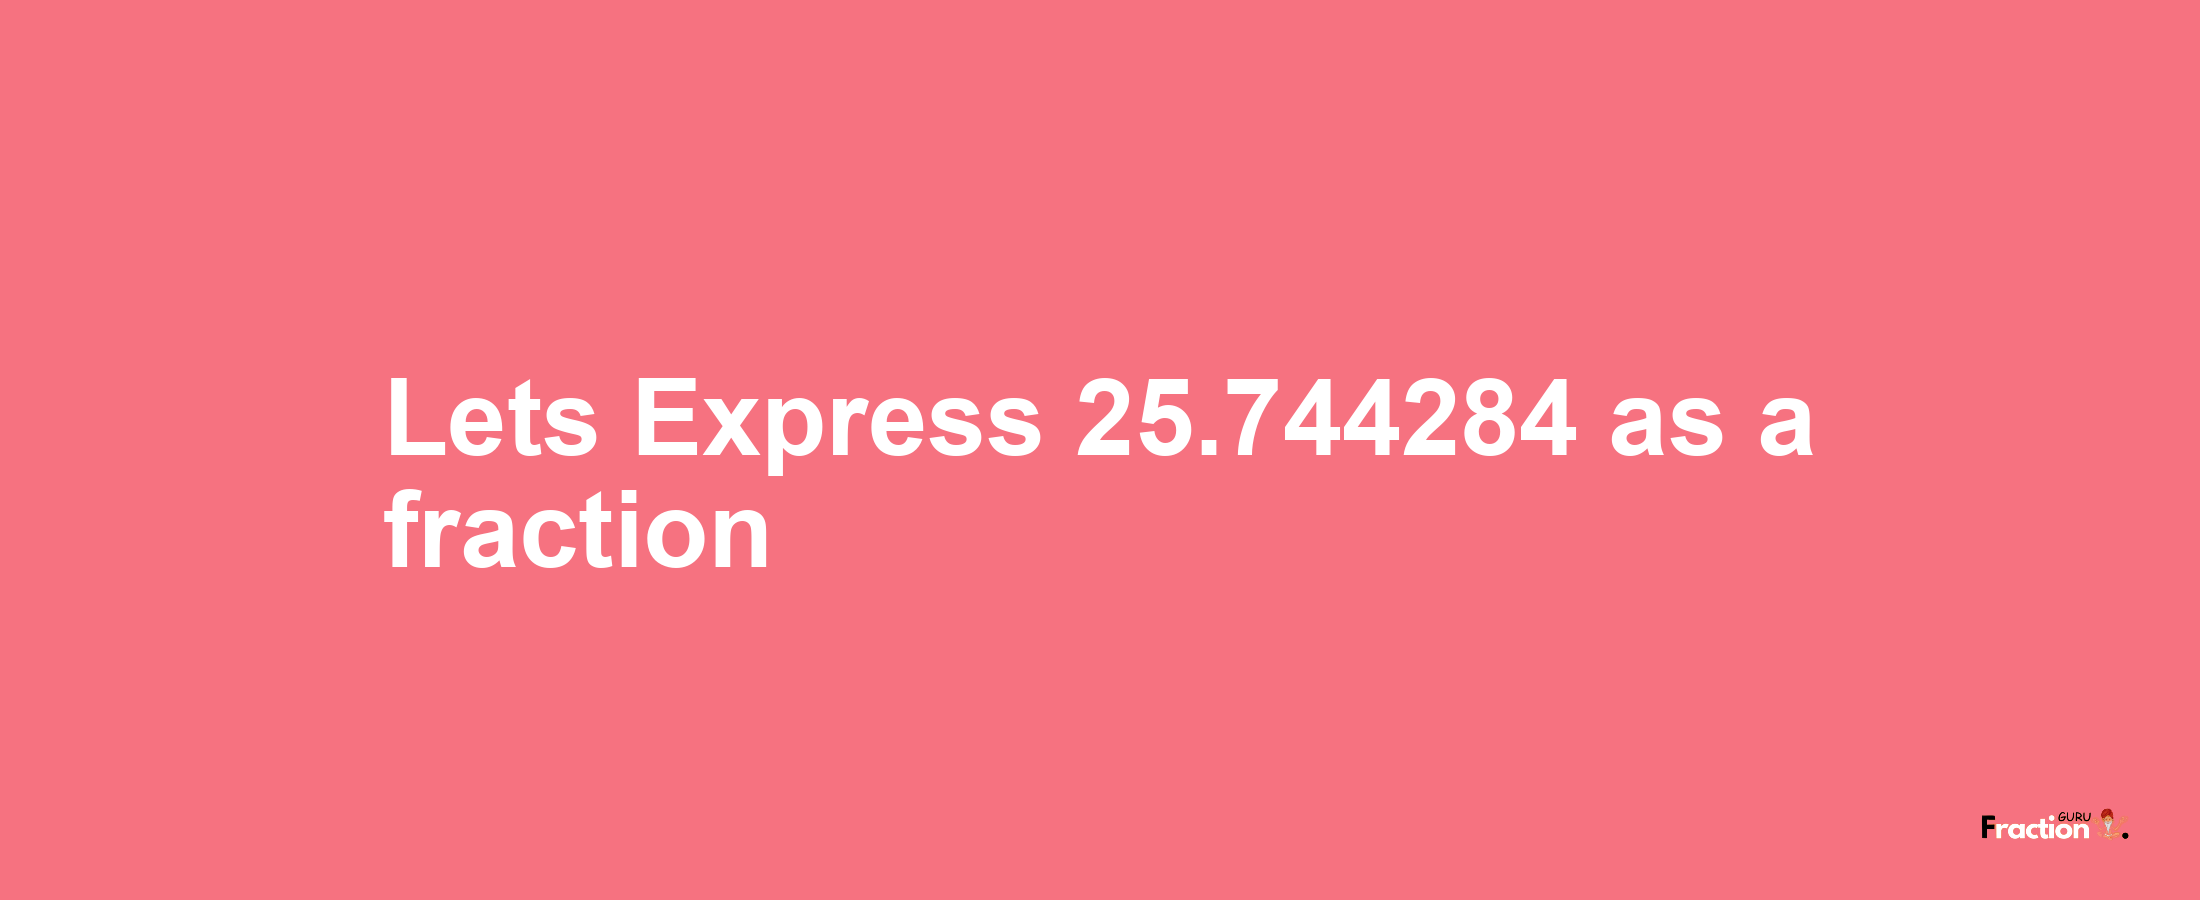 Lets Express 25.744284 as afraction